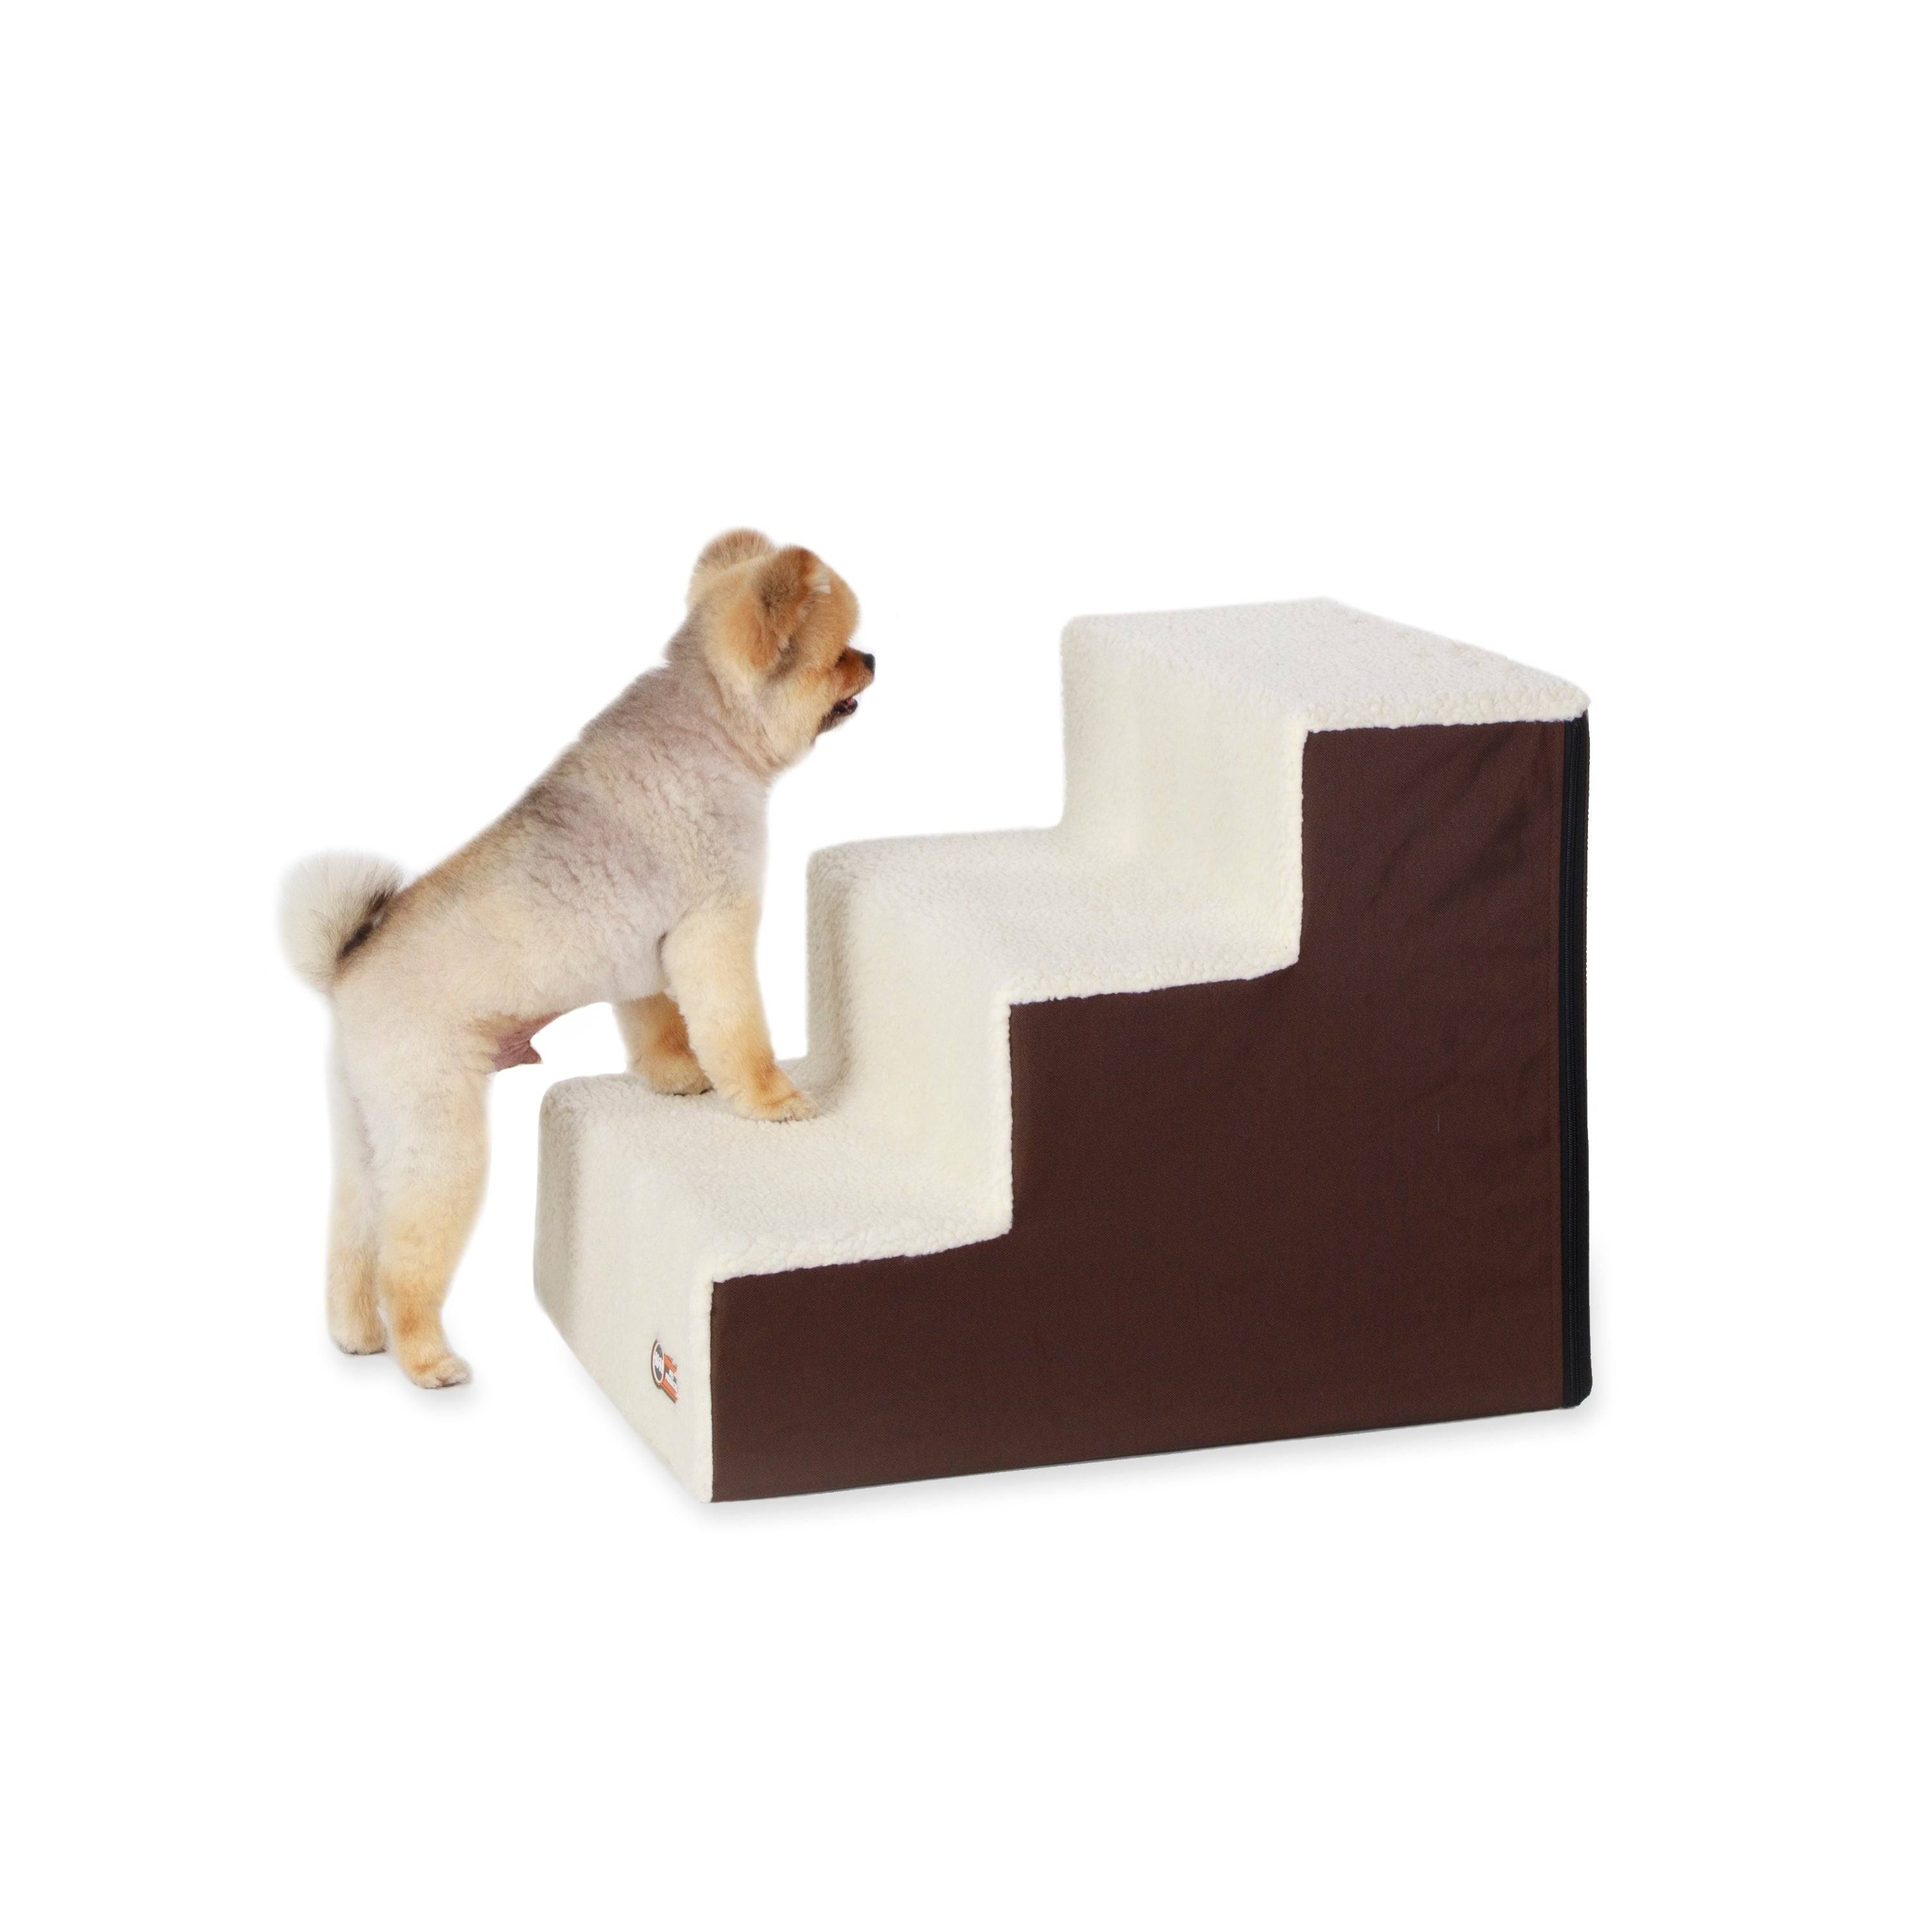 K&H Pet Products Chocolate Fleece 3-Step Pet Stair | Image